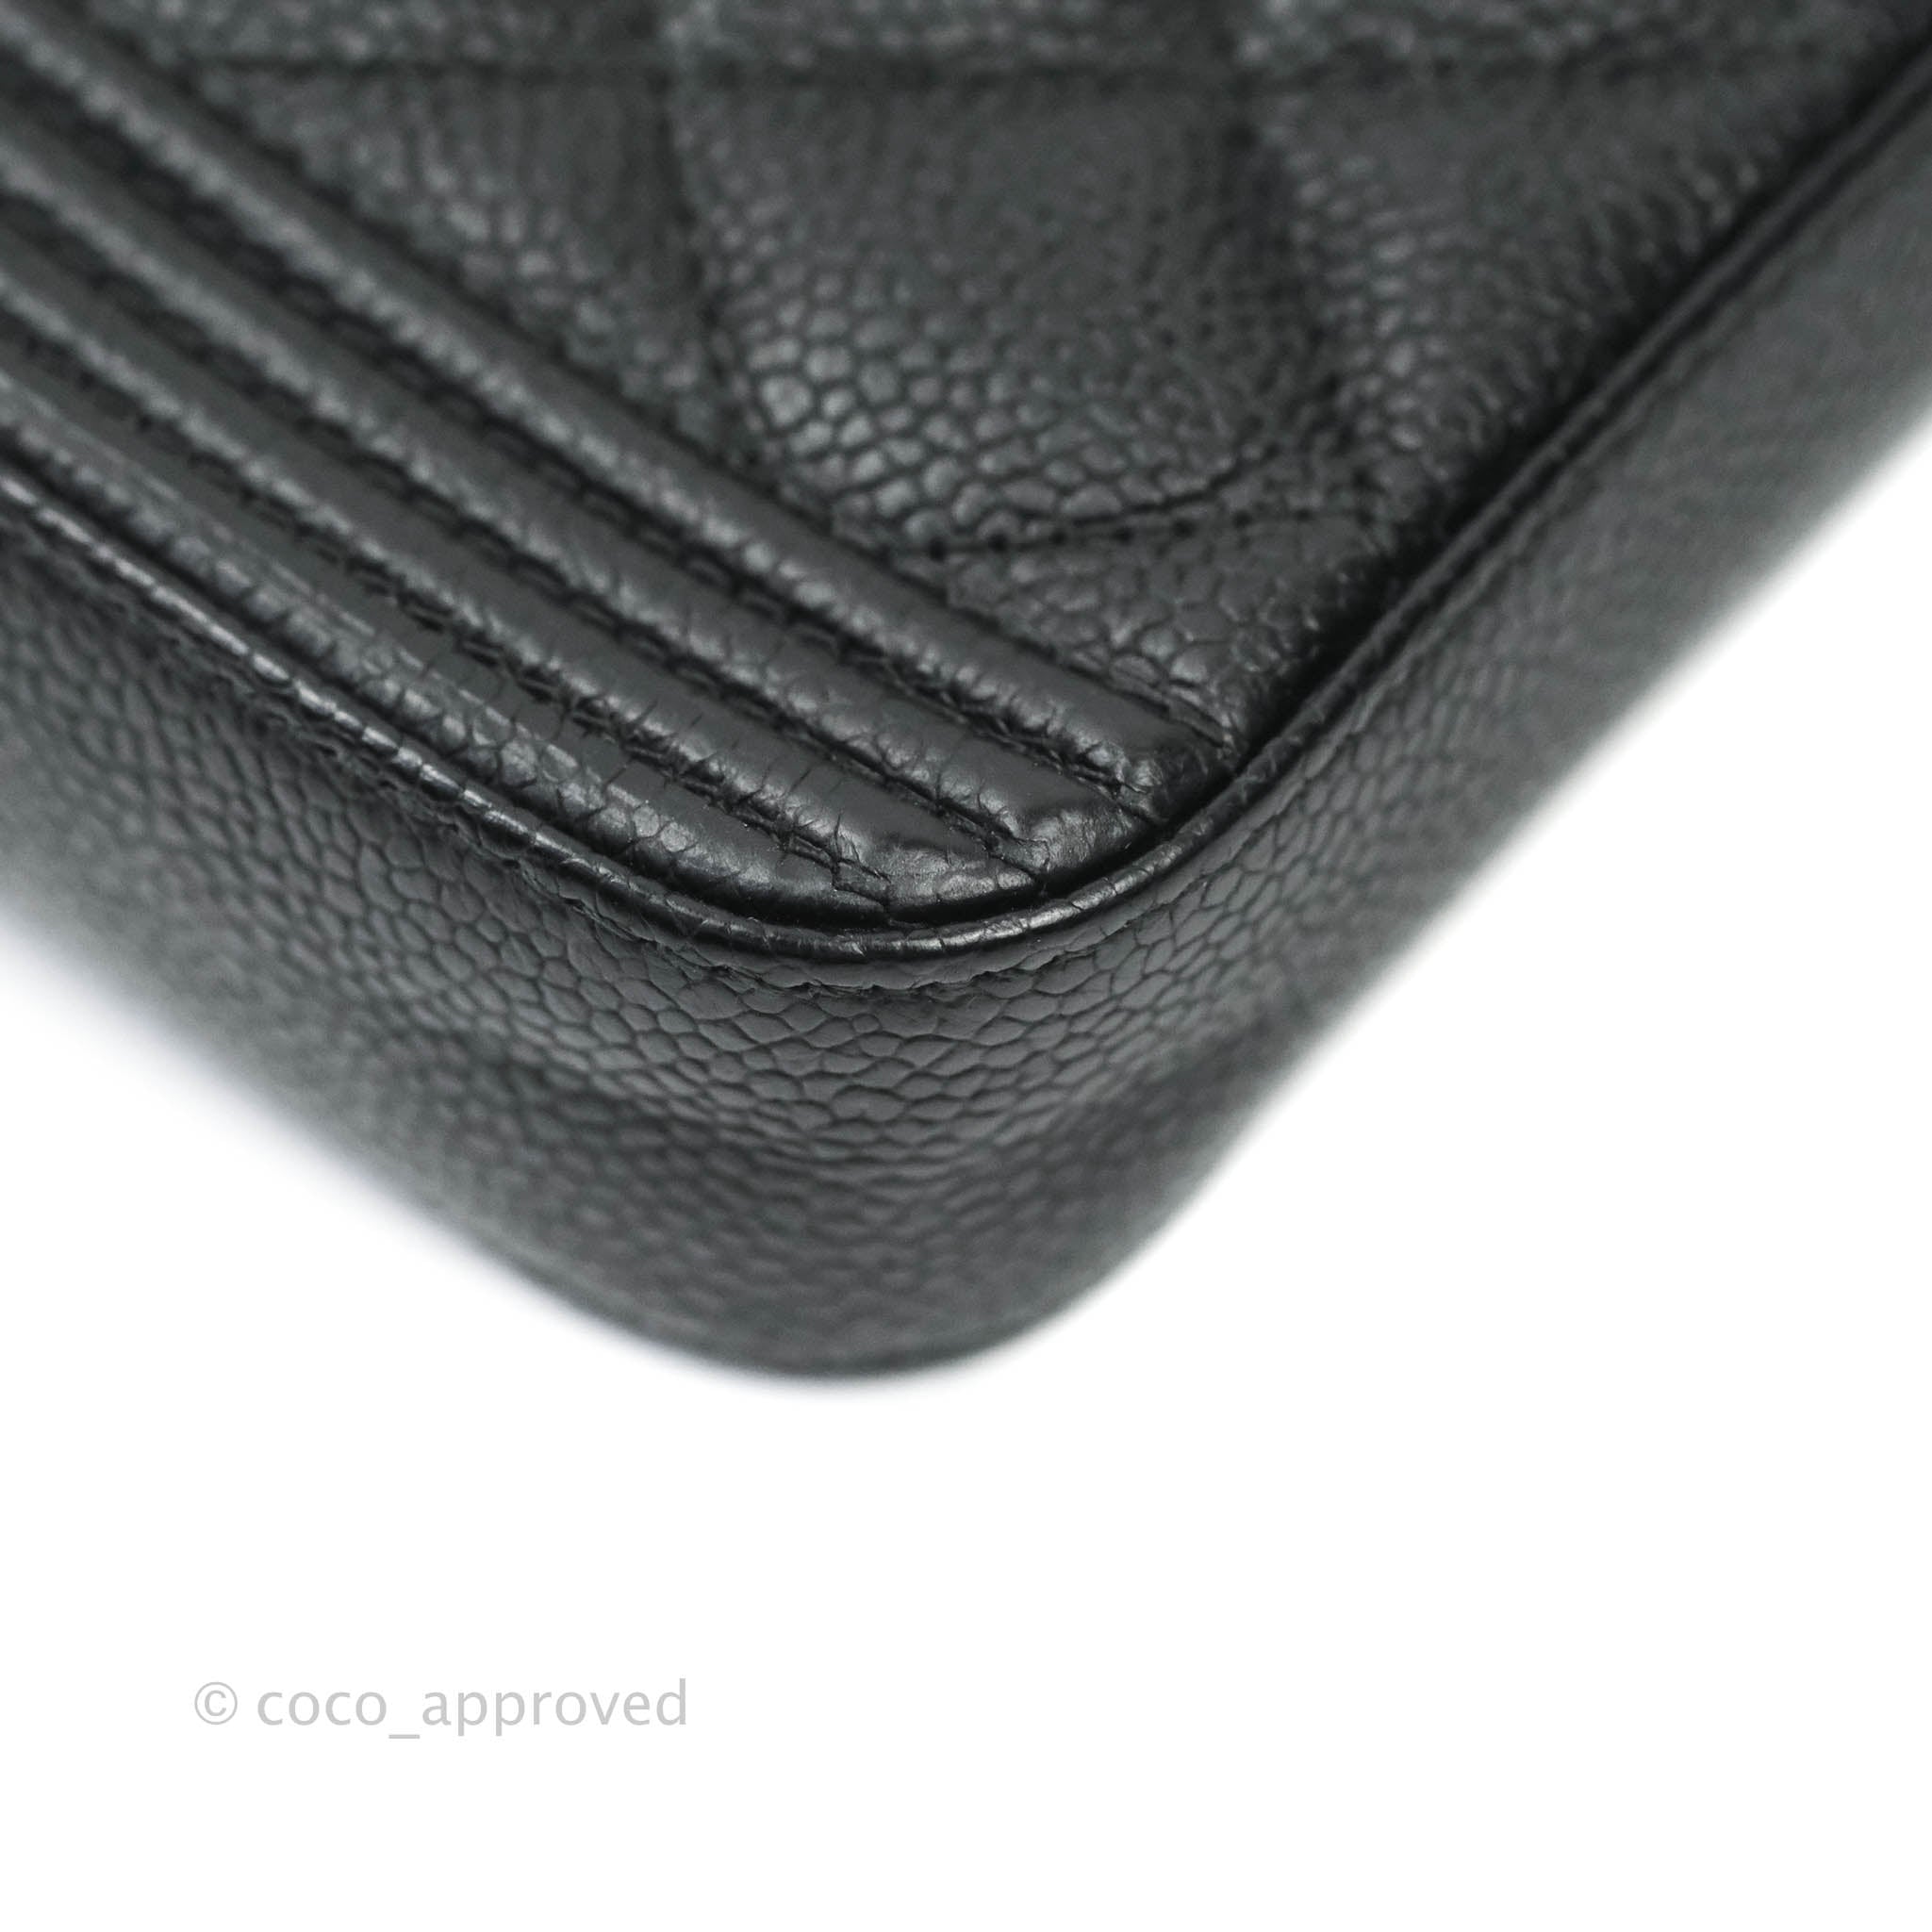 Chanel Quilted Lambskin Leather Wallet on Silver Chain Black Crossbody Bag